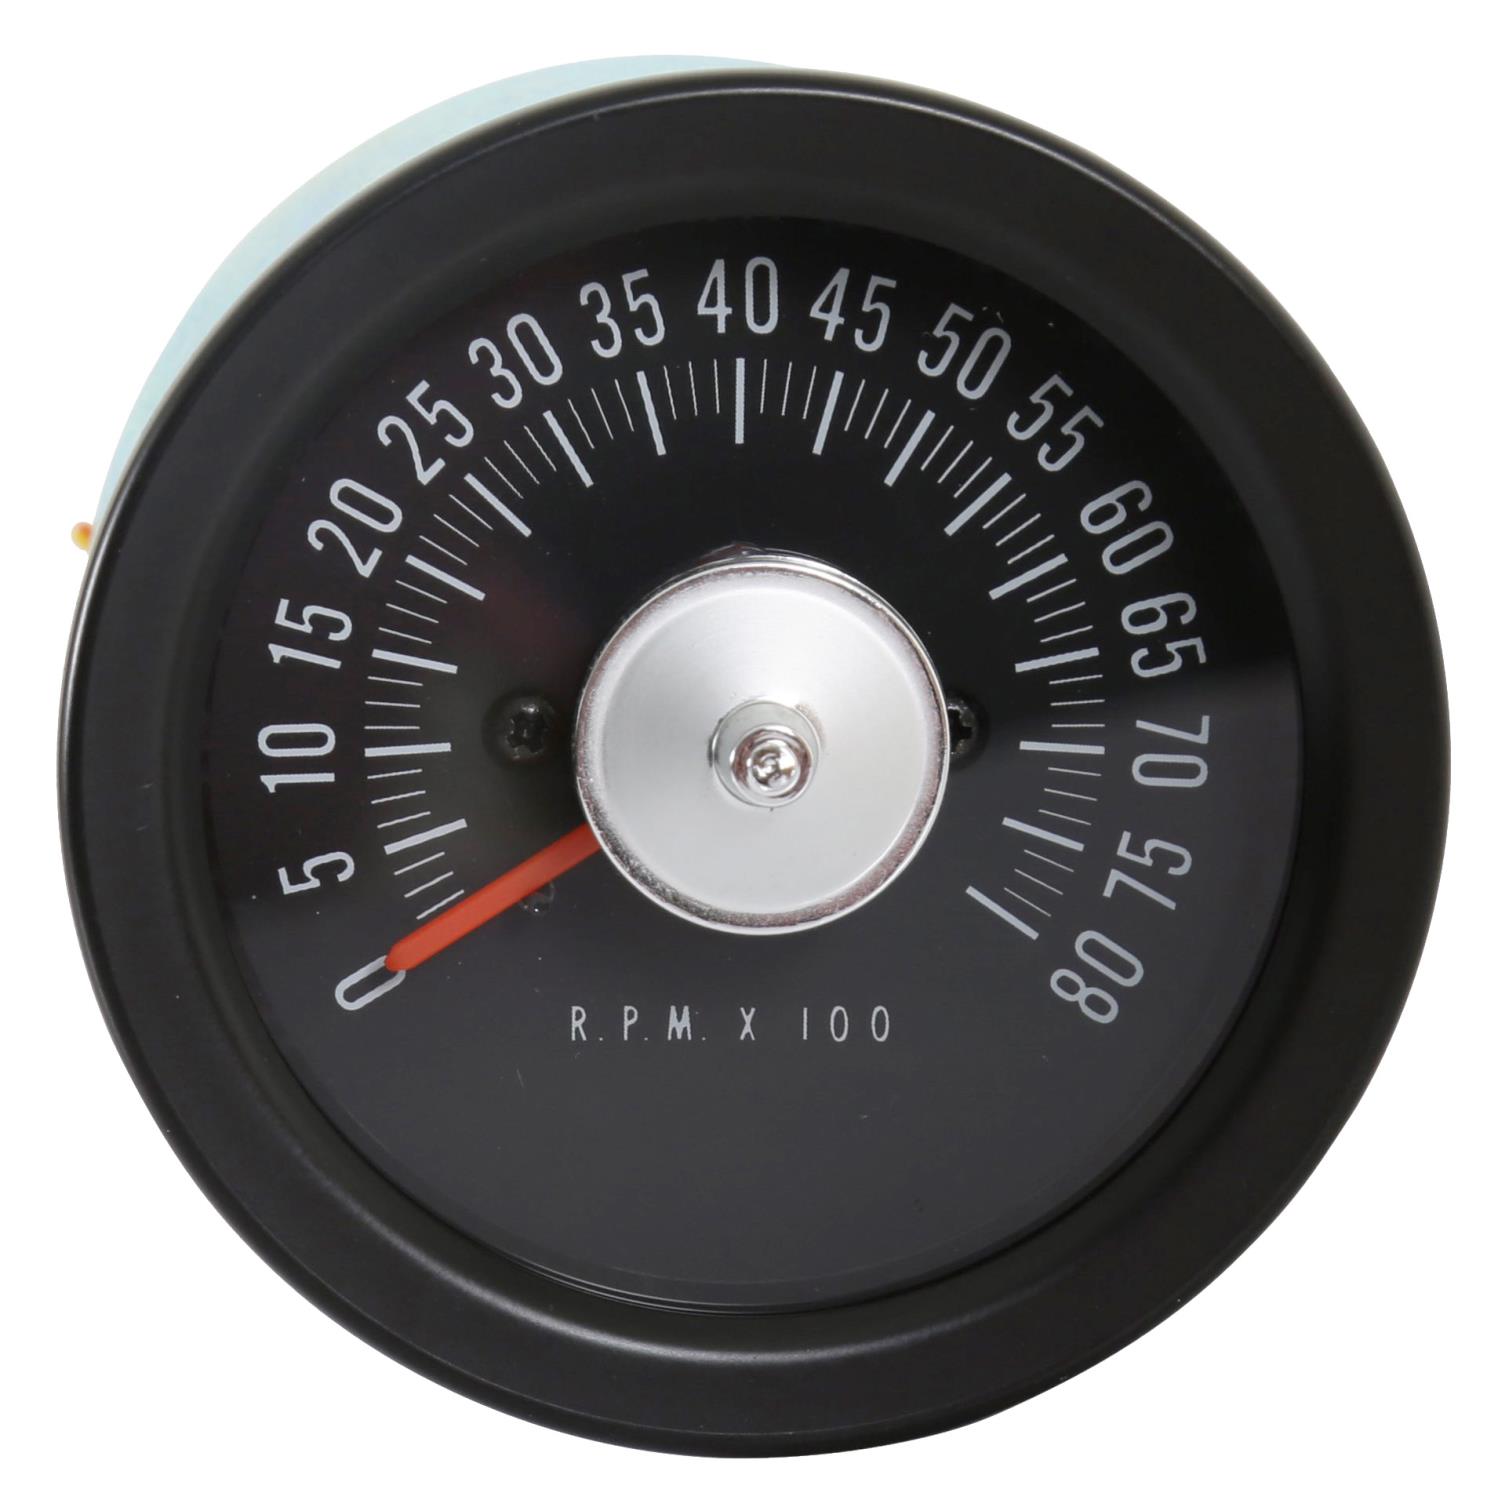 In-Dash Tachometer Conversion Kit for 1967-1968 Ford Mustang